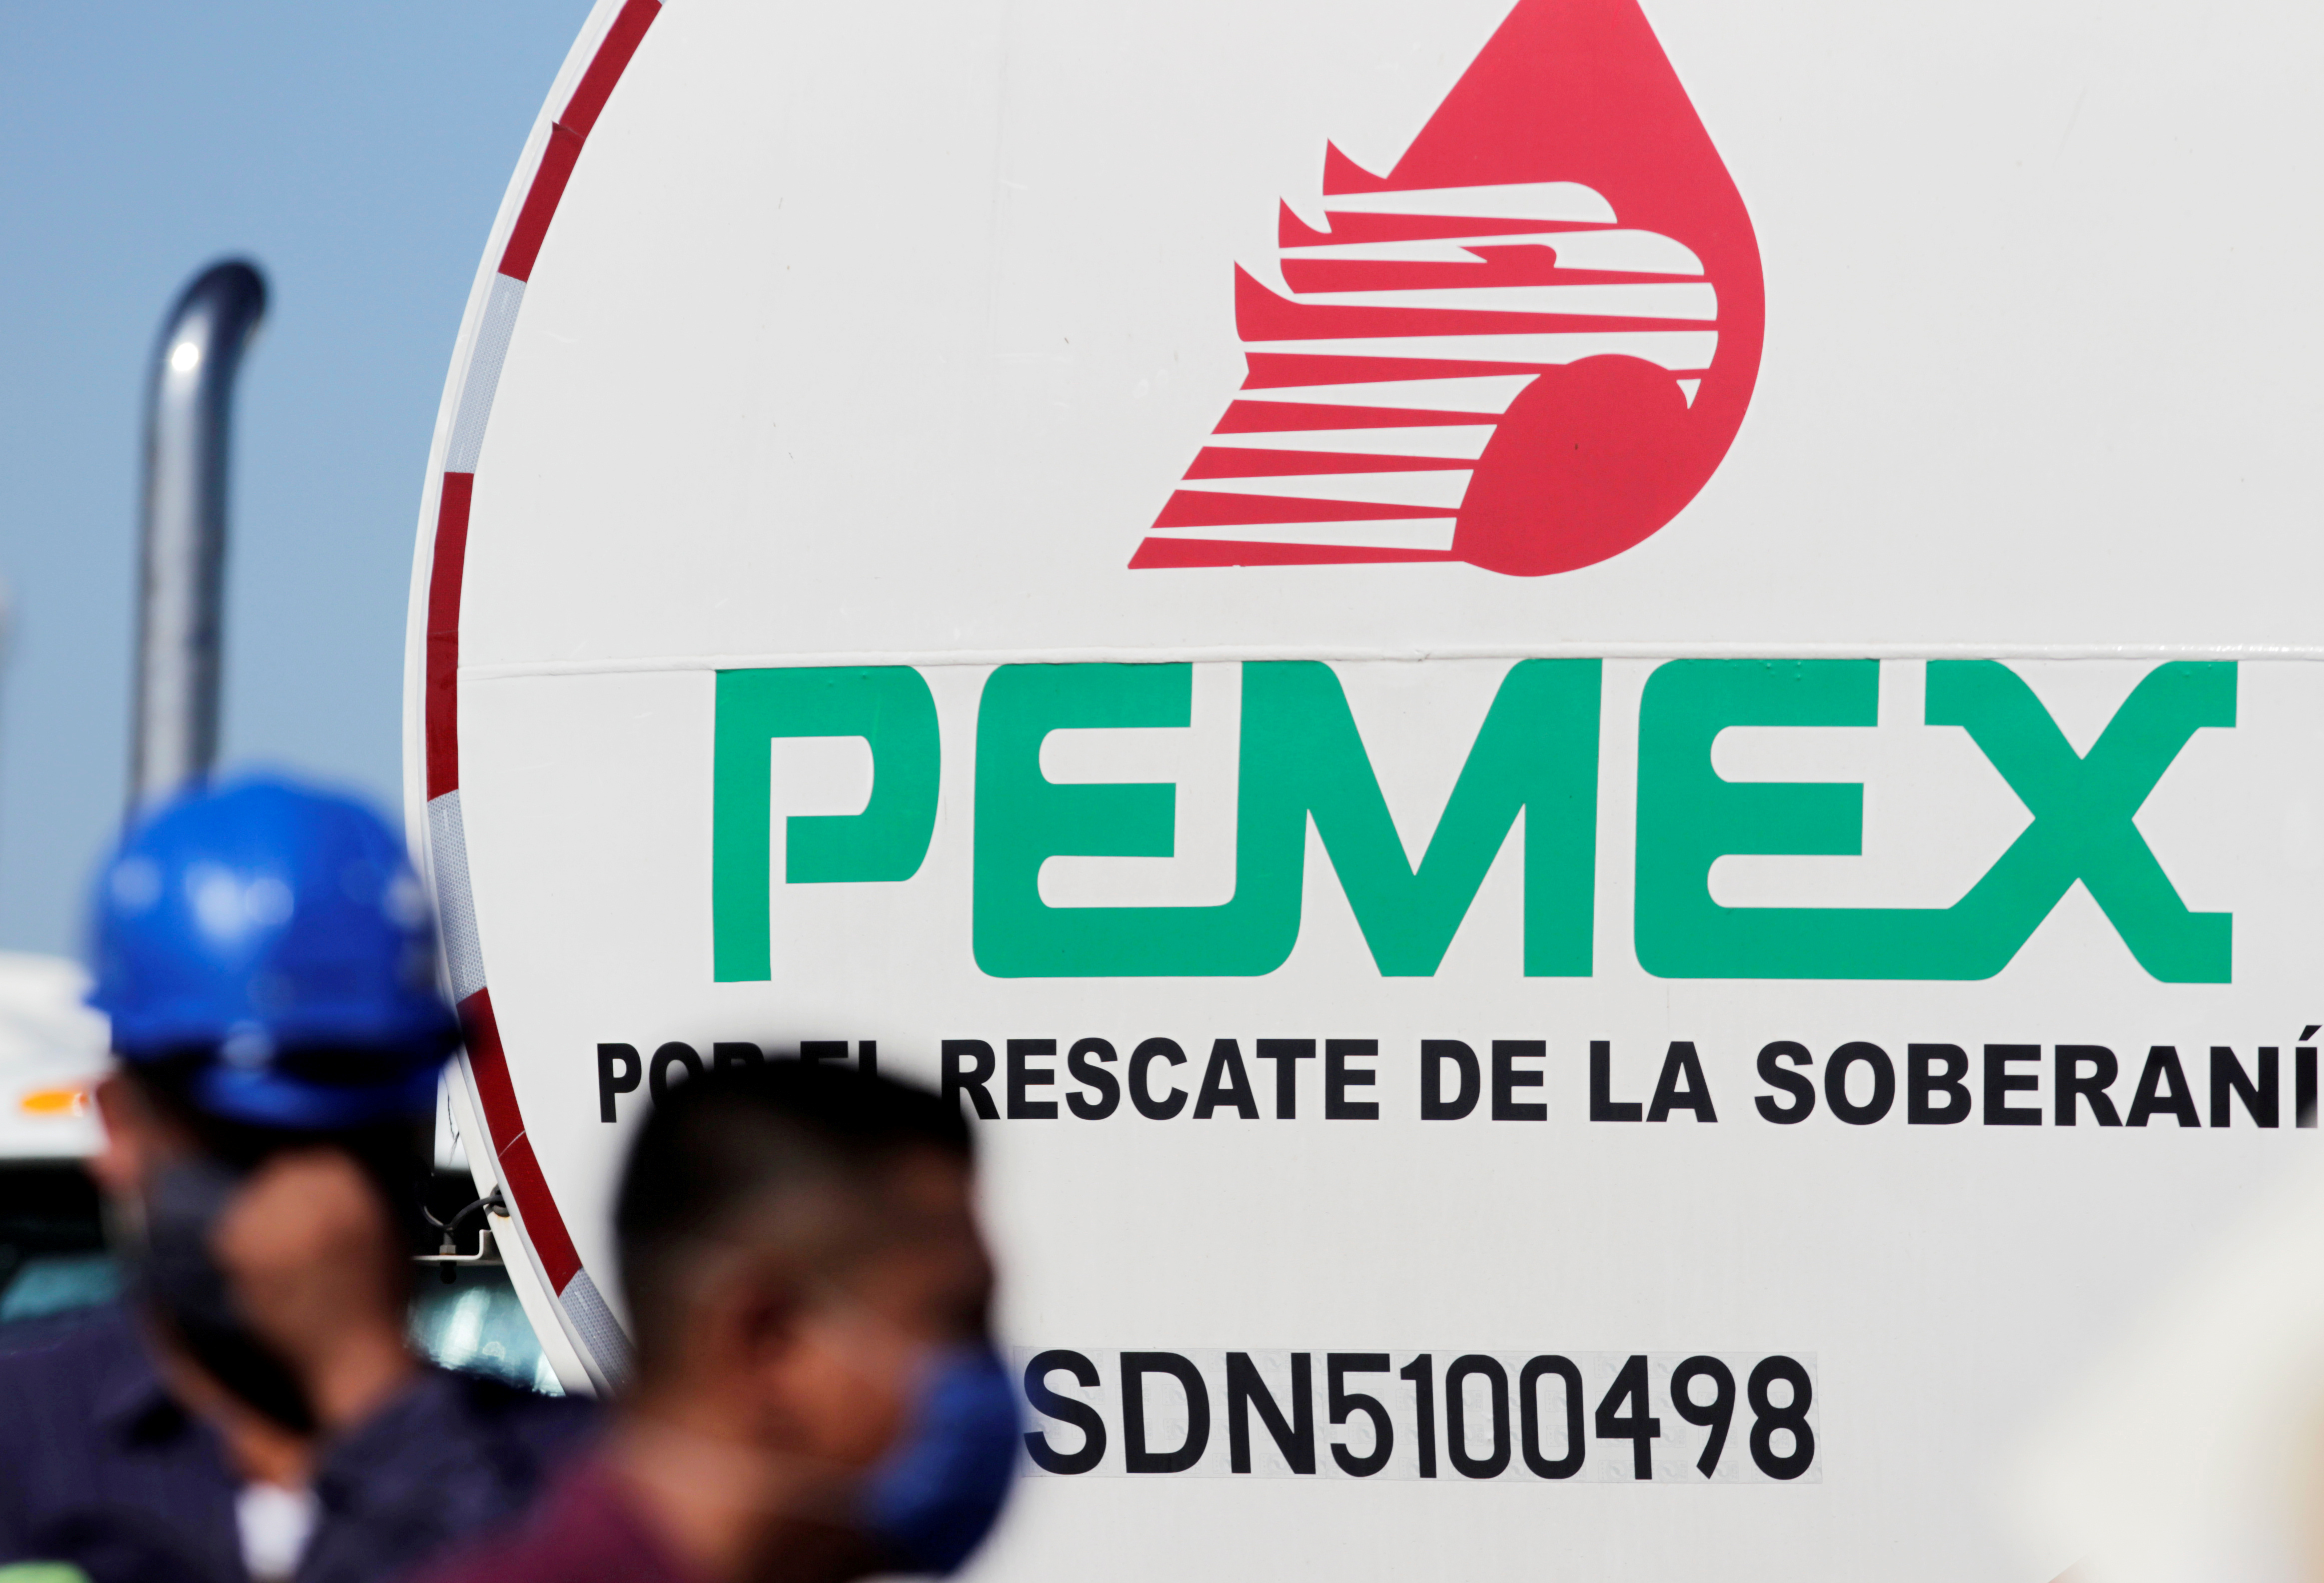 'Eye of fire' in Mexican waters snuffed out, says national oil company